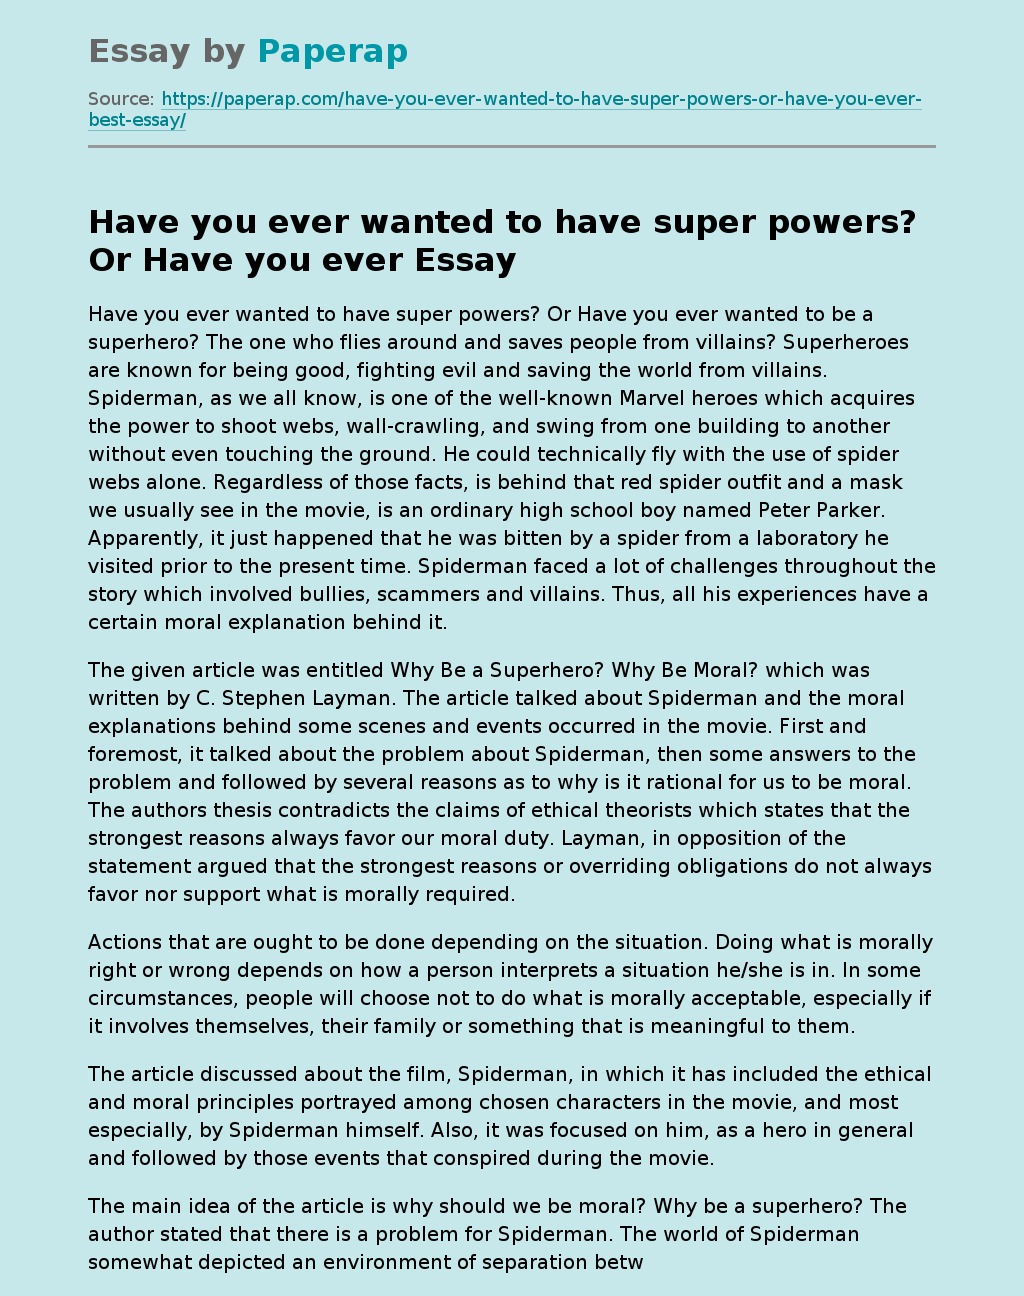 Have you ever wanted to have super powers? Or Have you ever